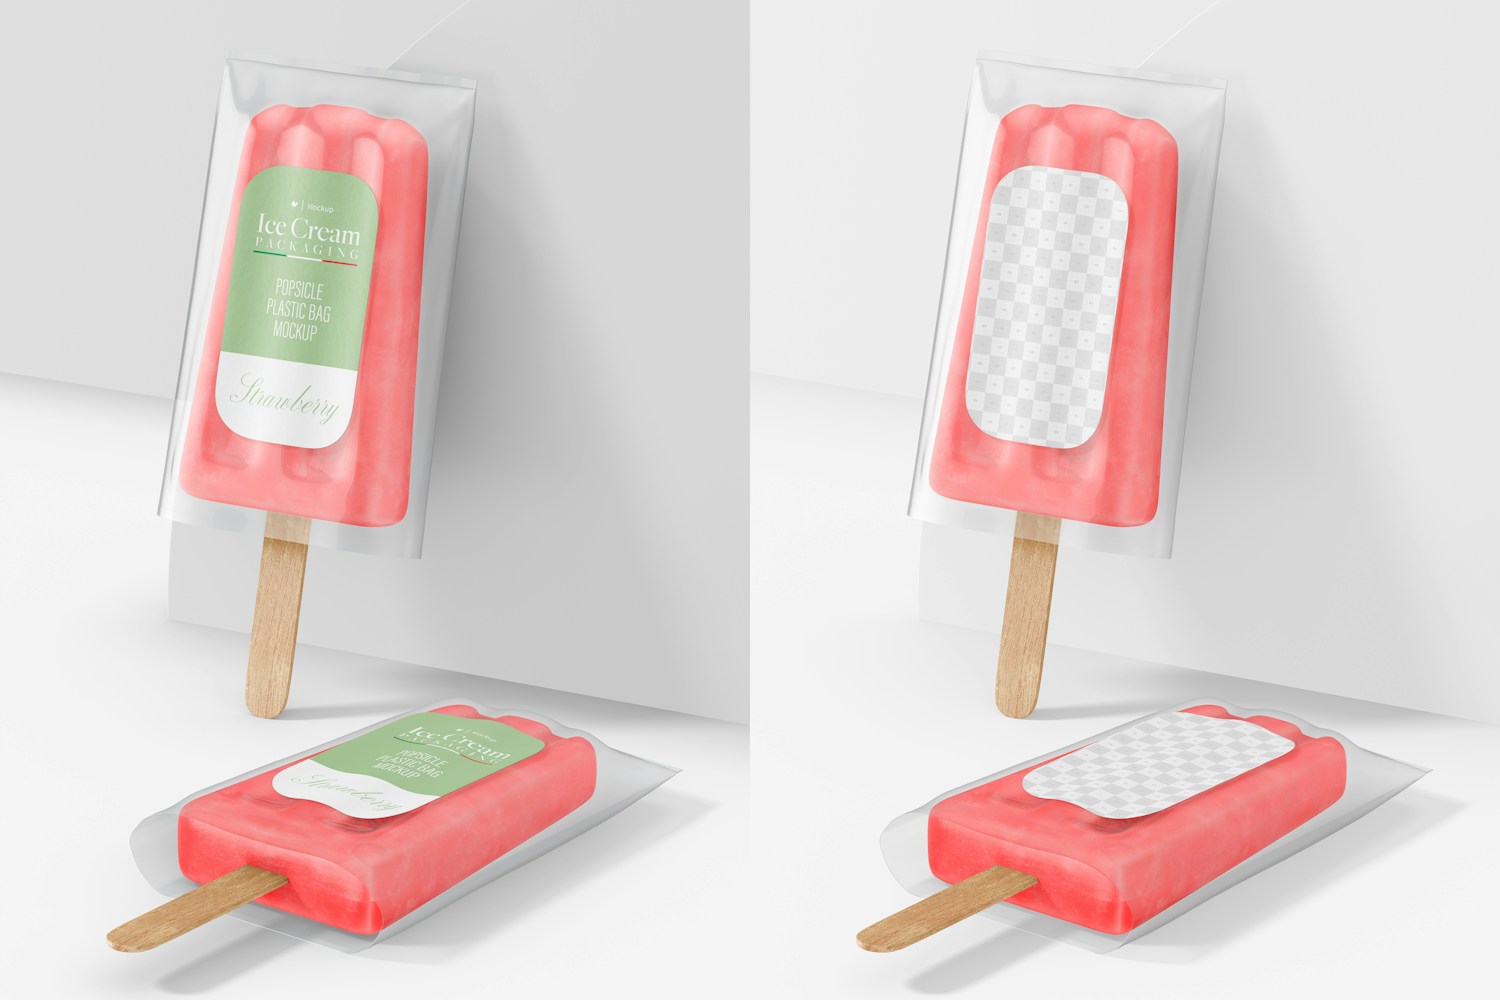 Popsicle Plastic Bags with Tag Mockup, Leaned